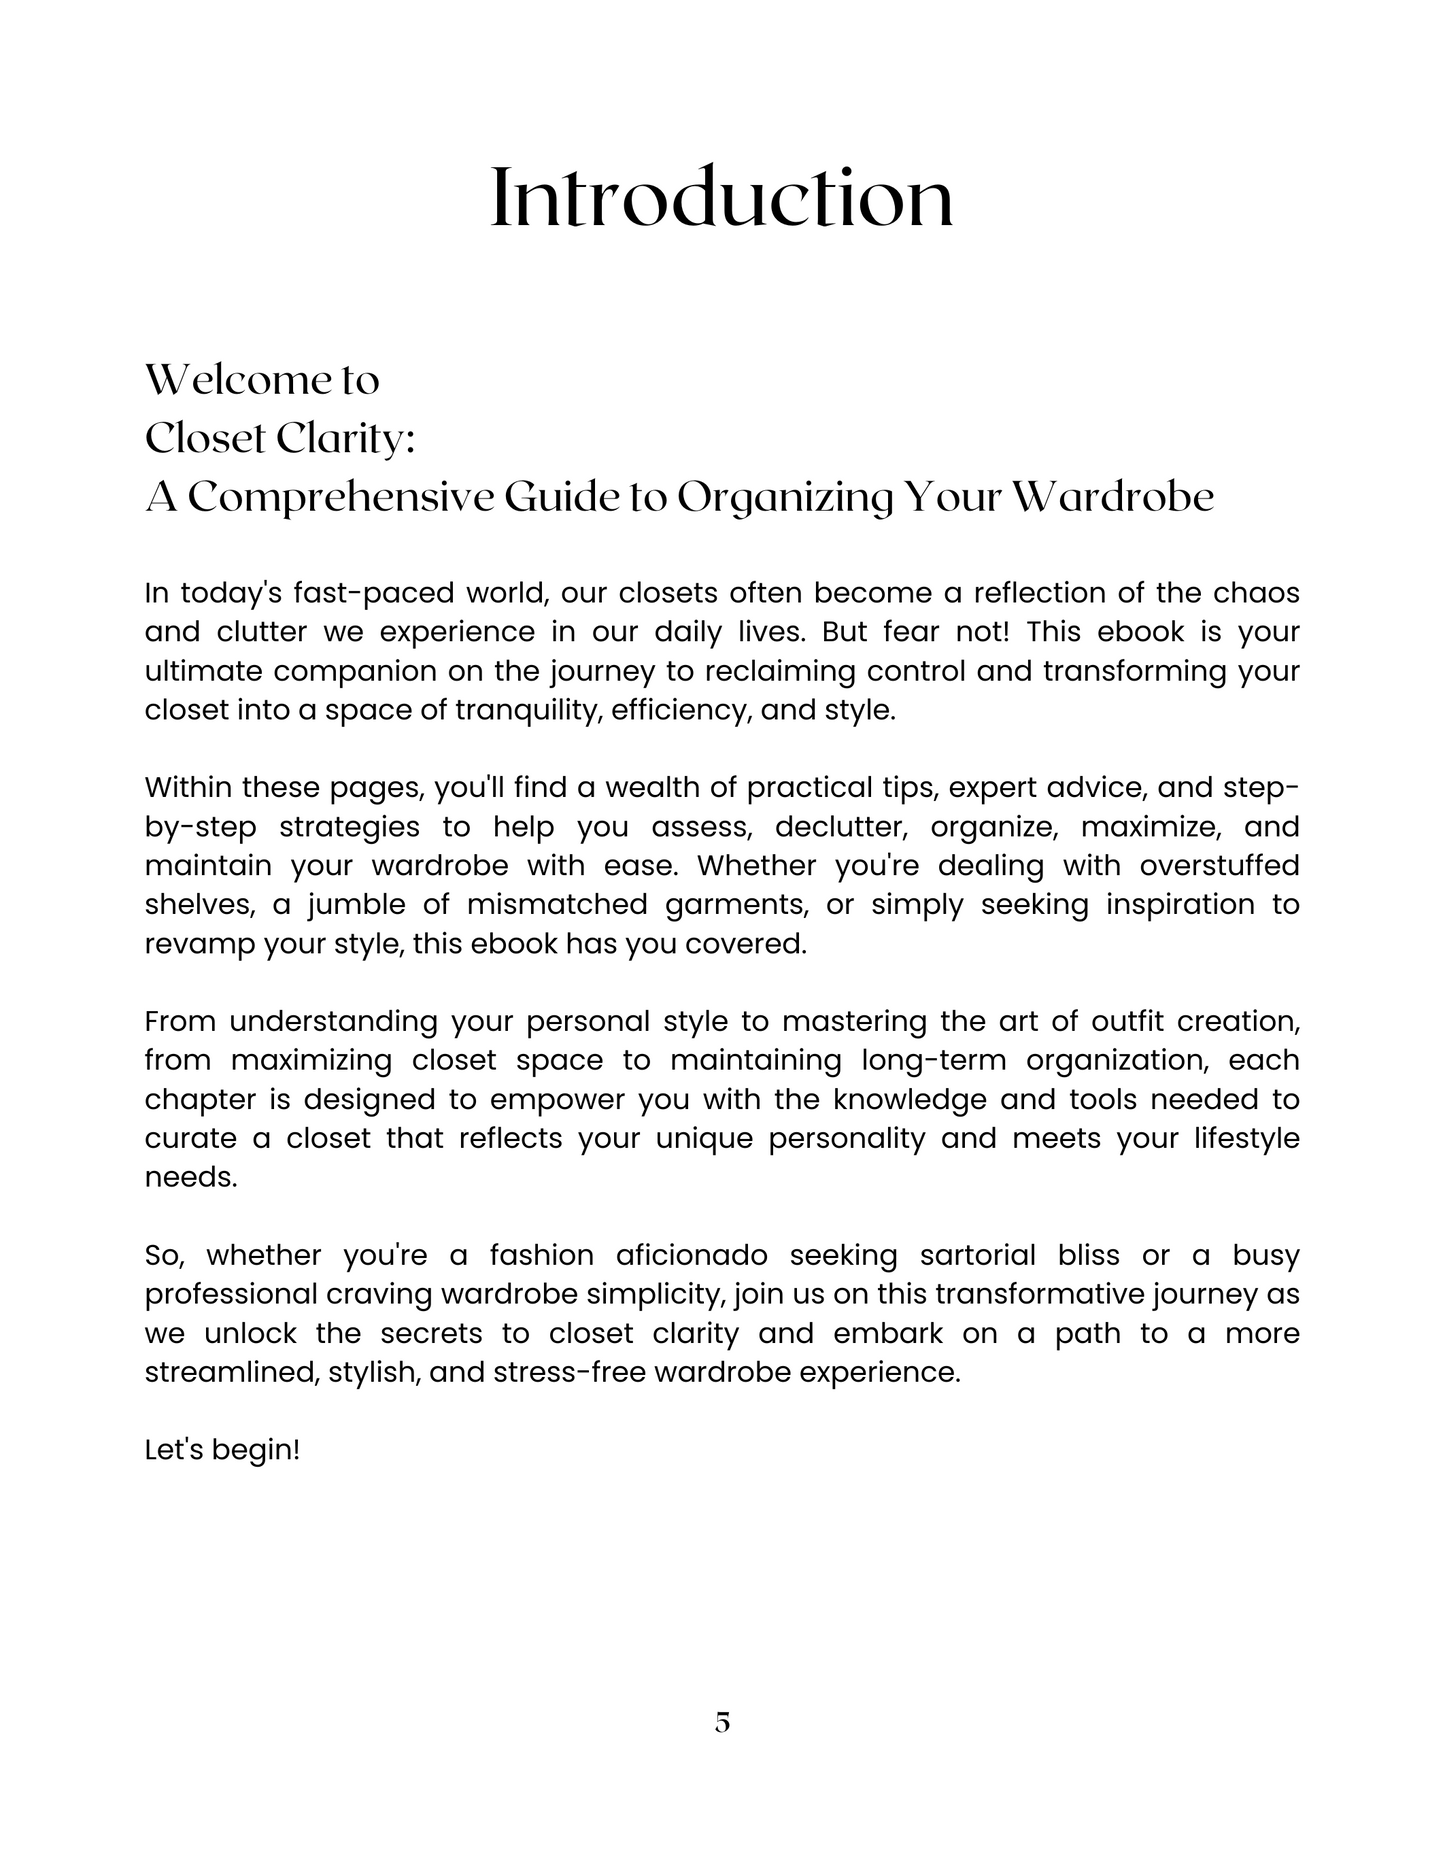 Introduction for 'Closet Clarity: A Comprehensive Guide.' Declutter, organize, and style effortlessly. Say hello to closet confidence! Download now.